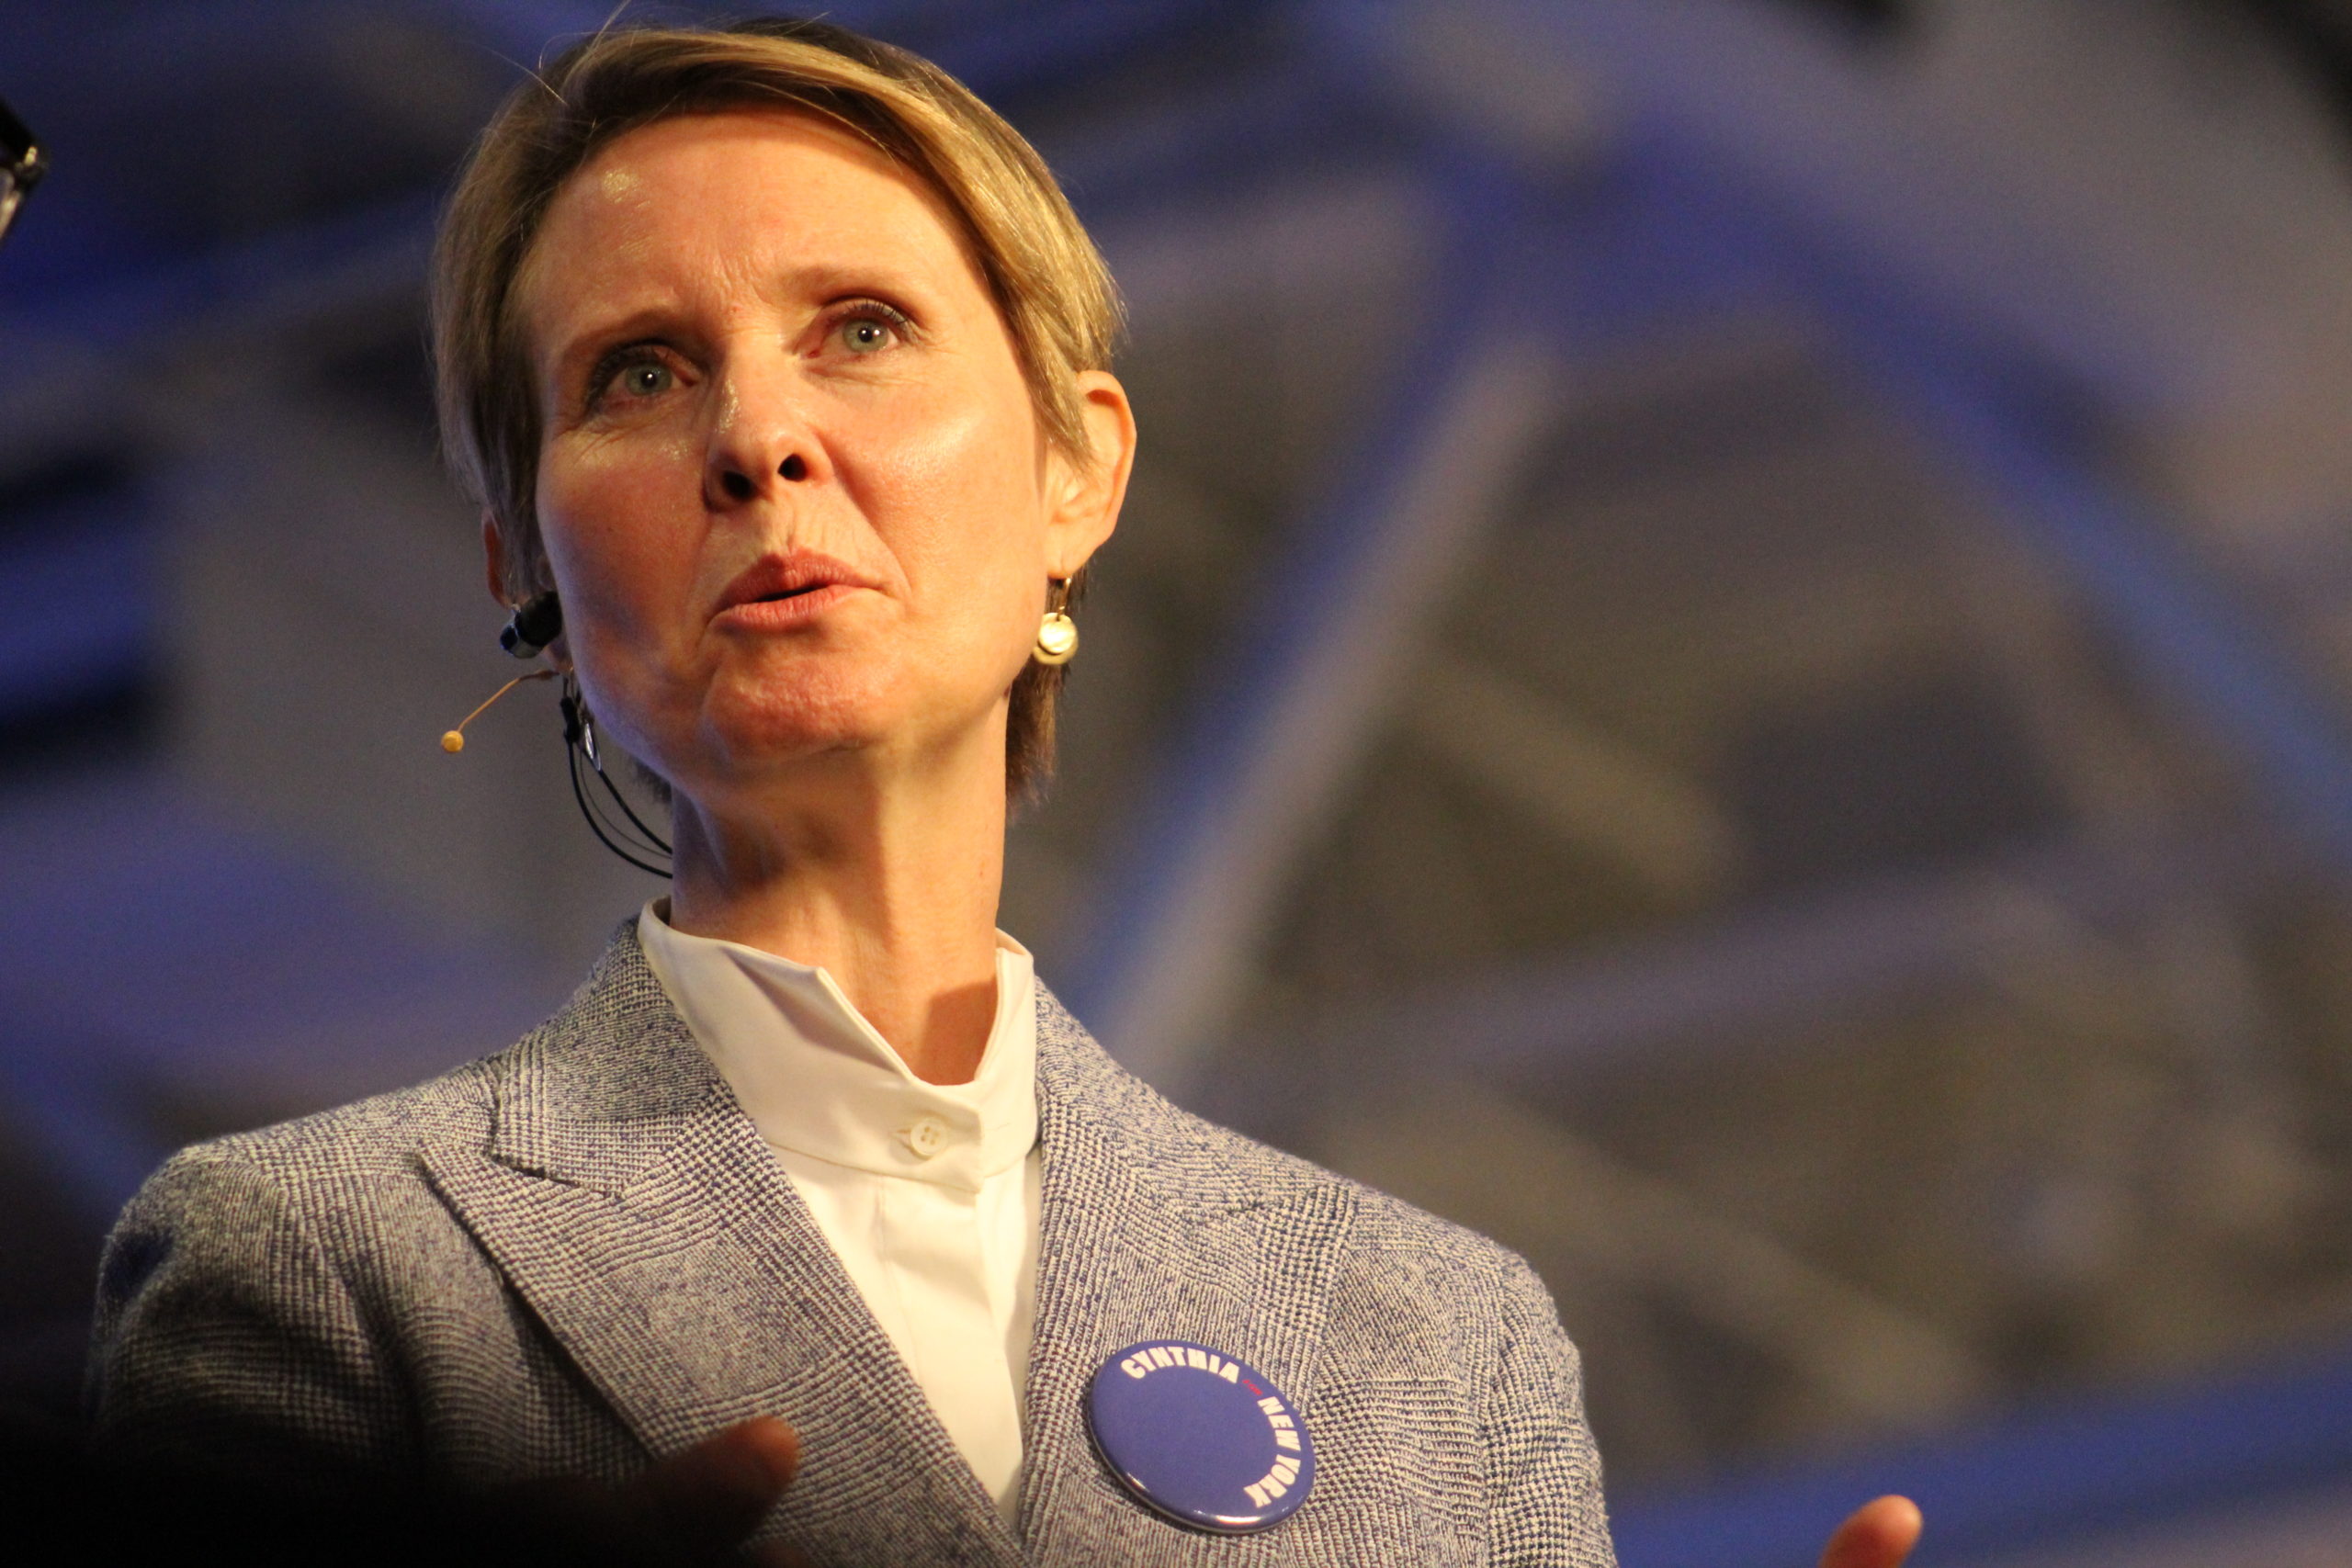 Cynthia Nixon, who is challenging Gov. Andrew Cuomo for the Democratic nomination for governor, blasted a mailer that sought to link her with anti-Semitism. (Photo by Rebecca Klar)